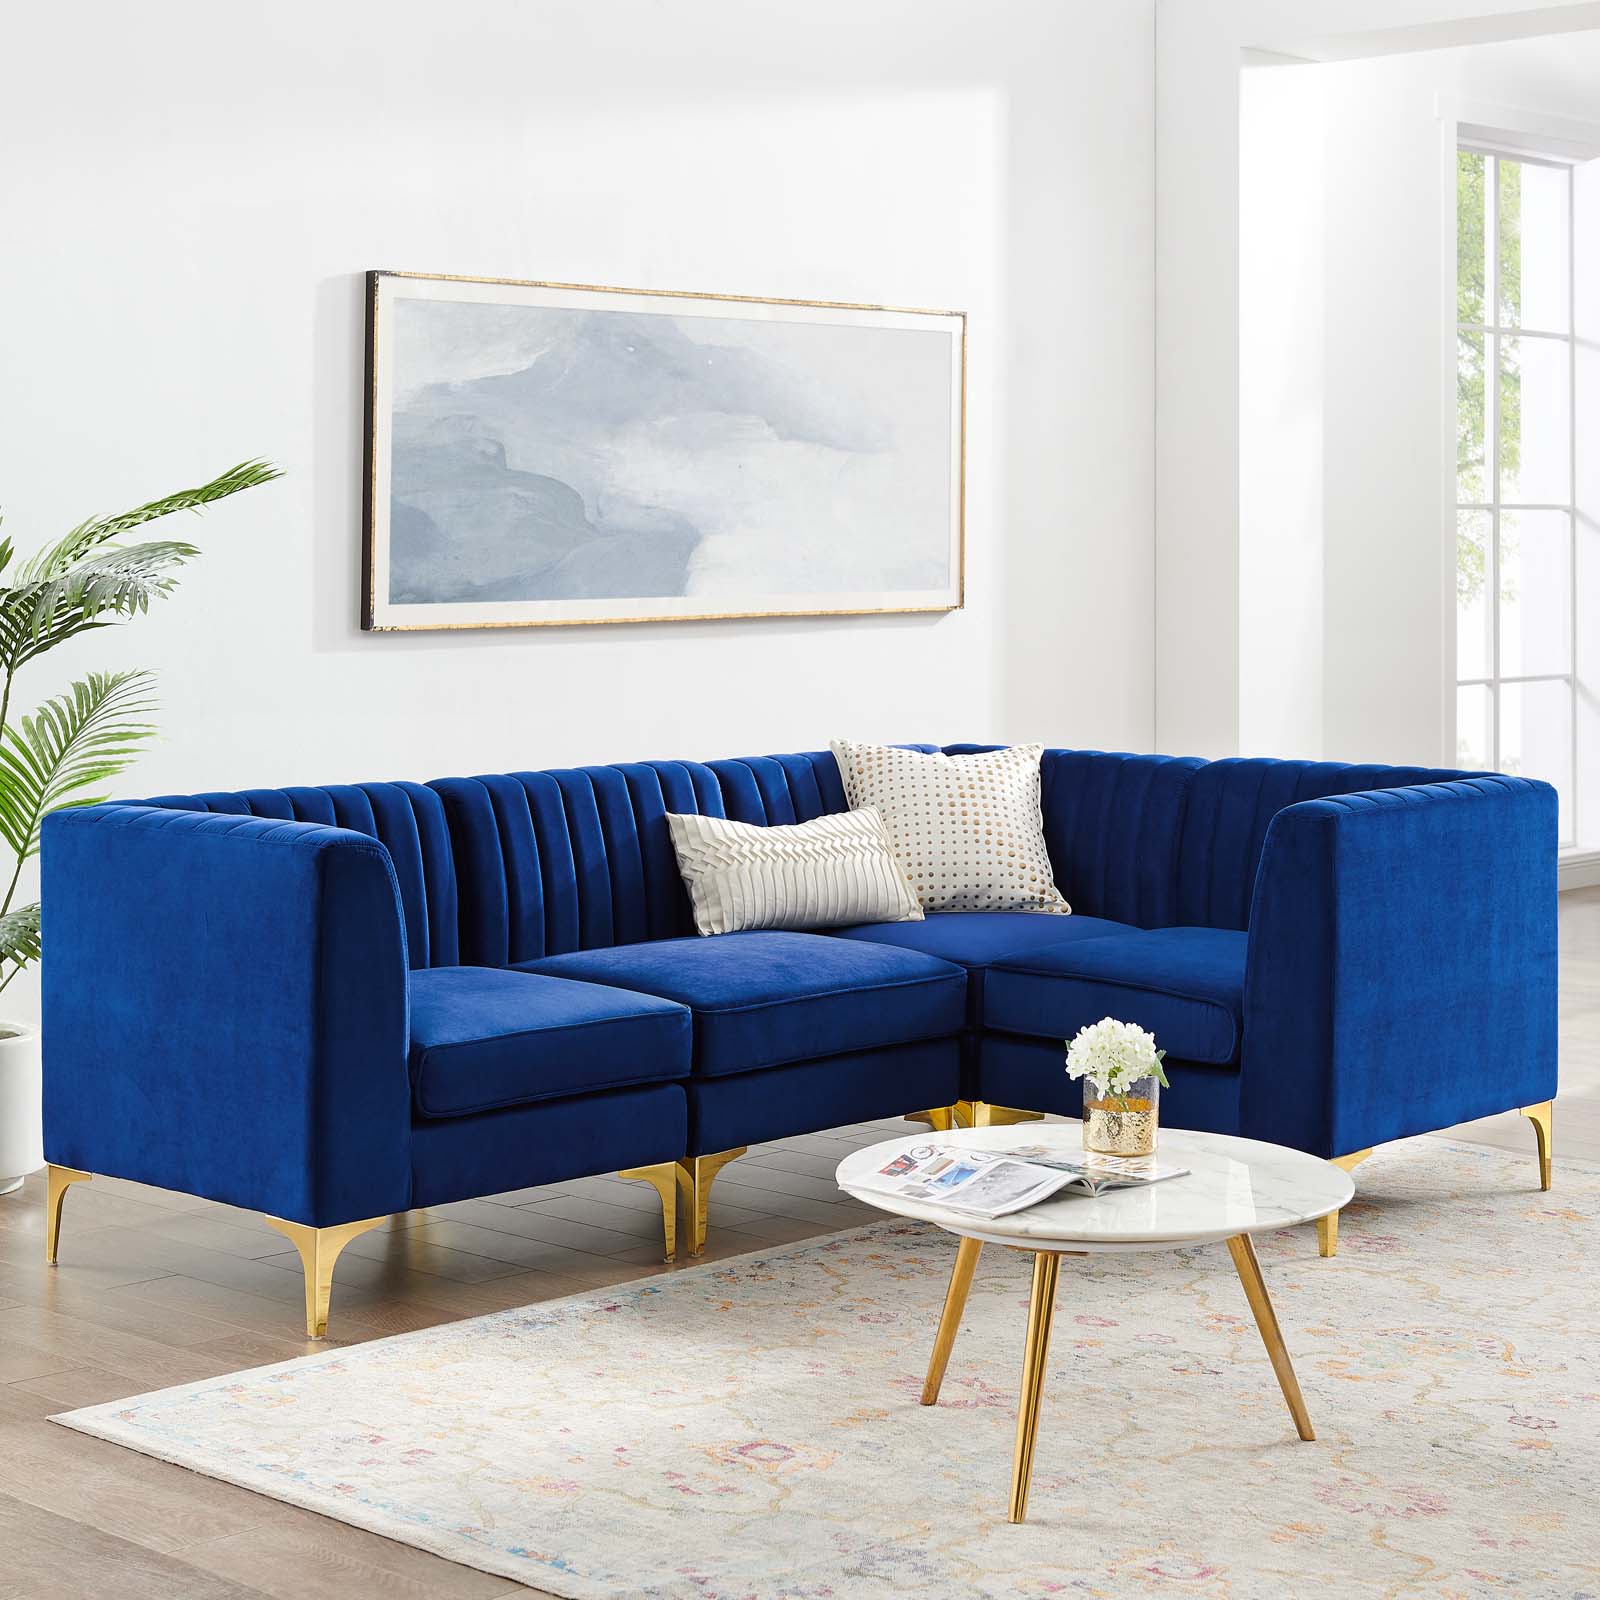 Modway Triumph 4-Piece Channel Performance Velvet Tufted Sectional Sofa in Navy - image 1 of 9